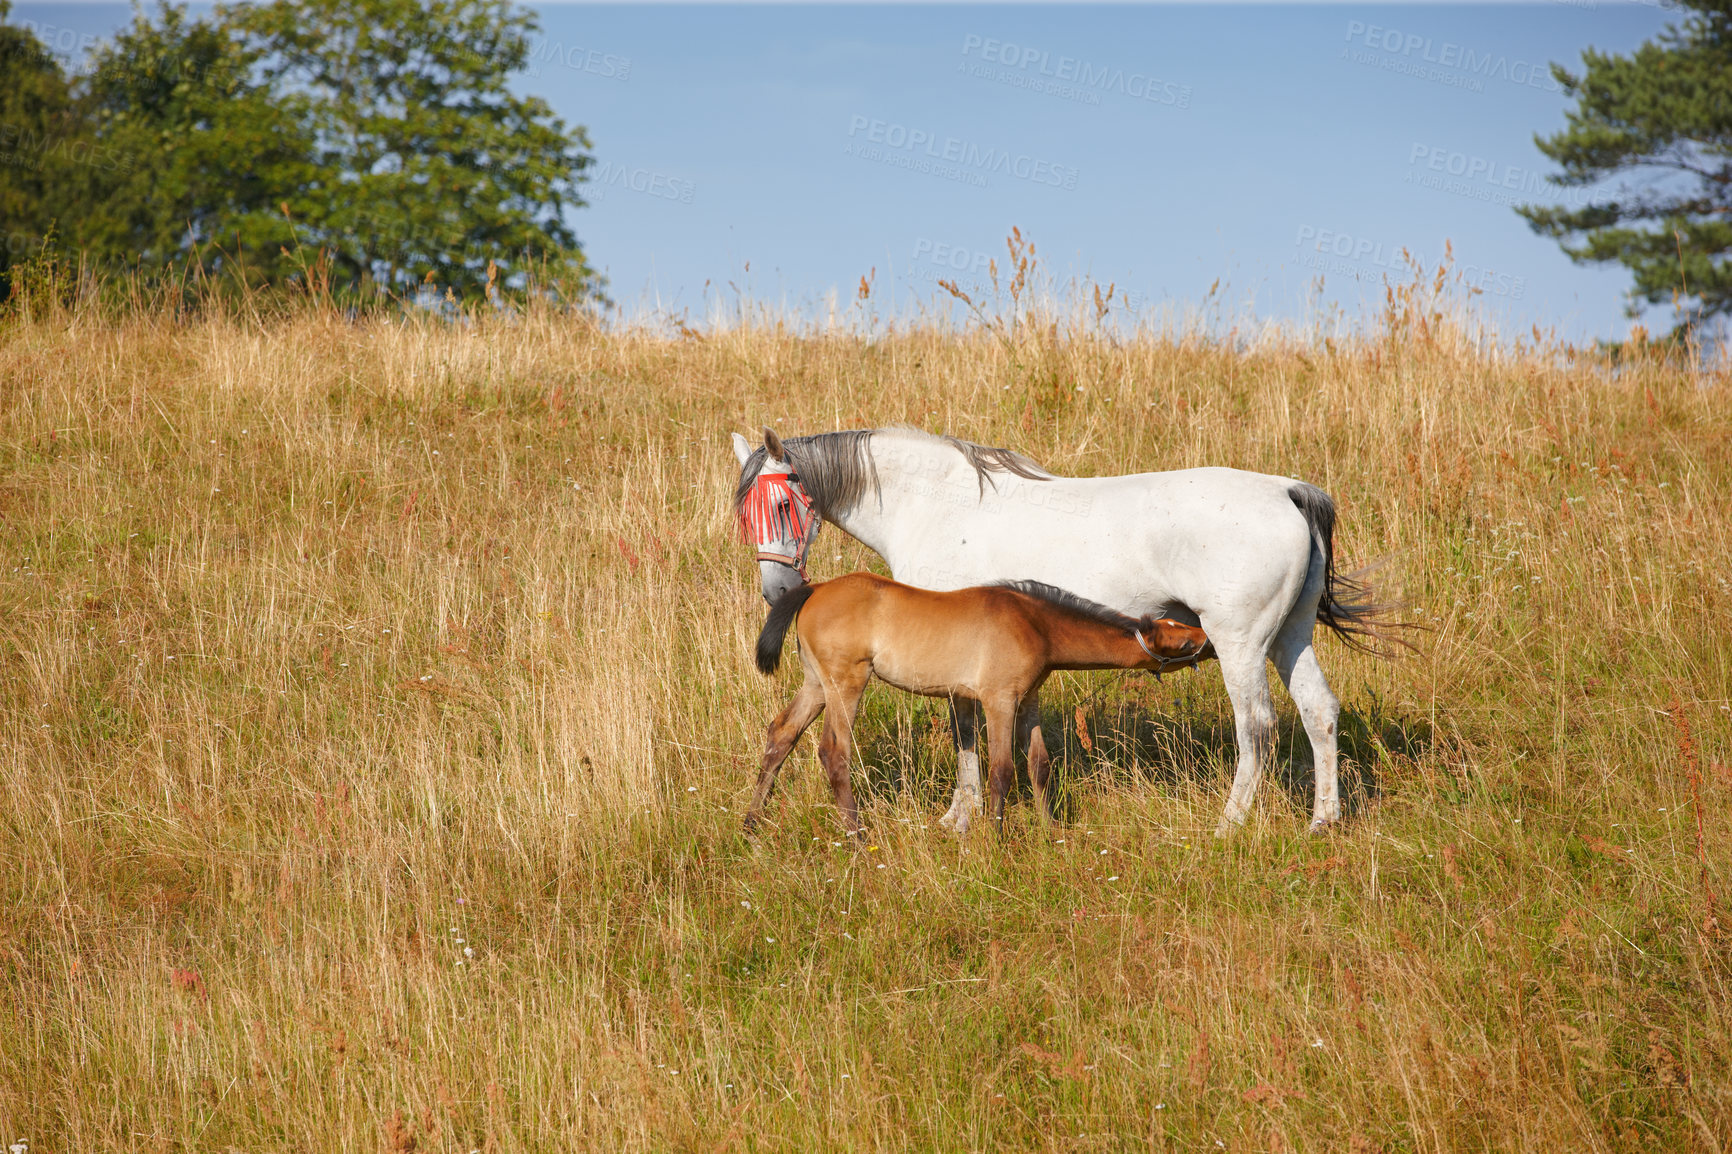 Buy stock photo A foal drinking milk from its mother outdoors in brown grassland. A horse suckling with a mare on a farm with trees and the sky in the background. Breeding animals on farmland or brown pasture